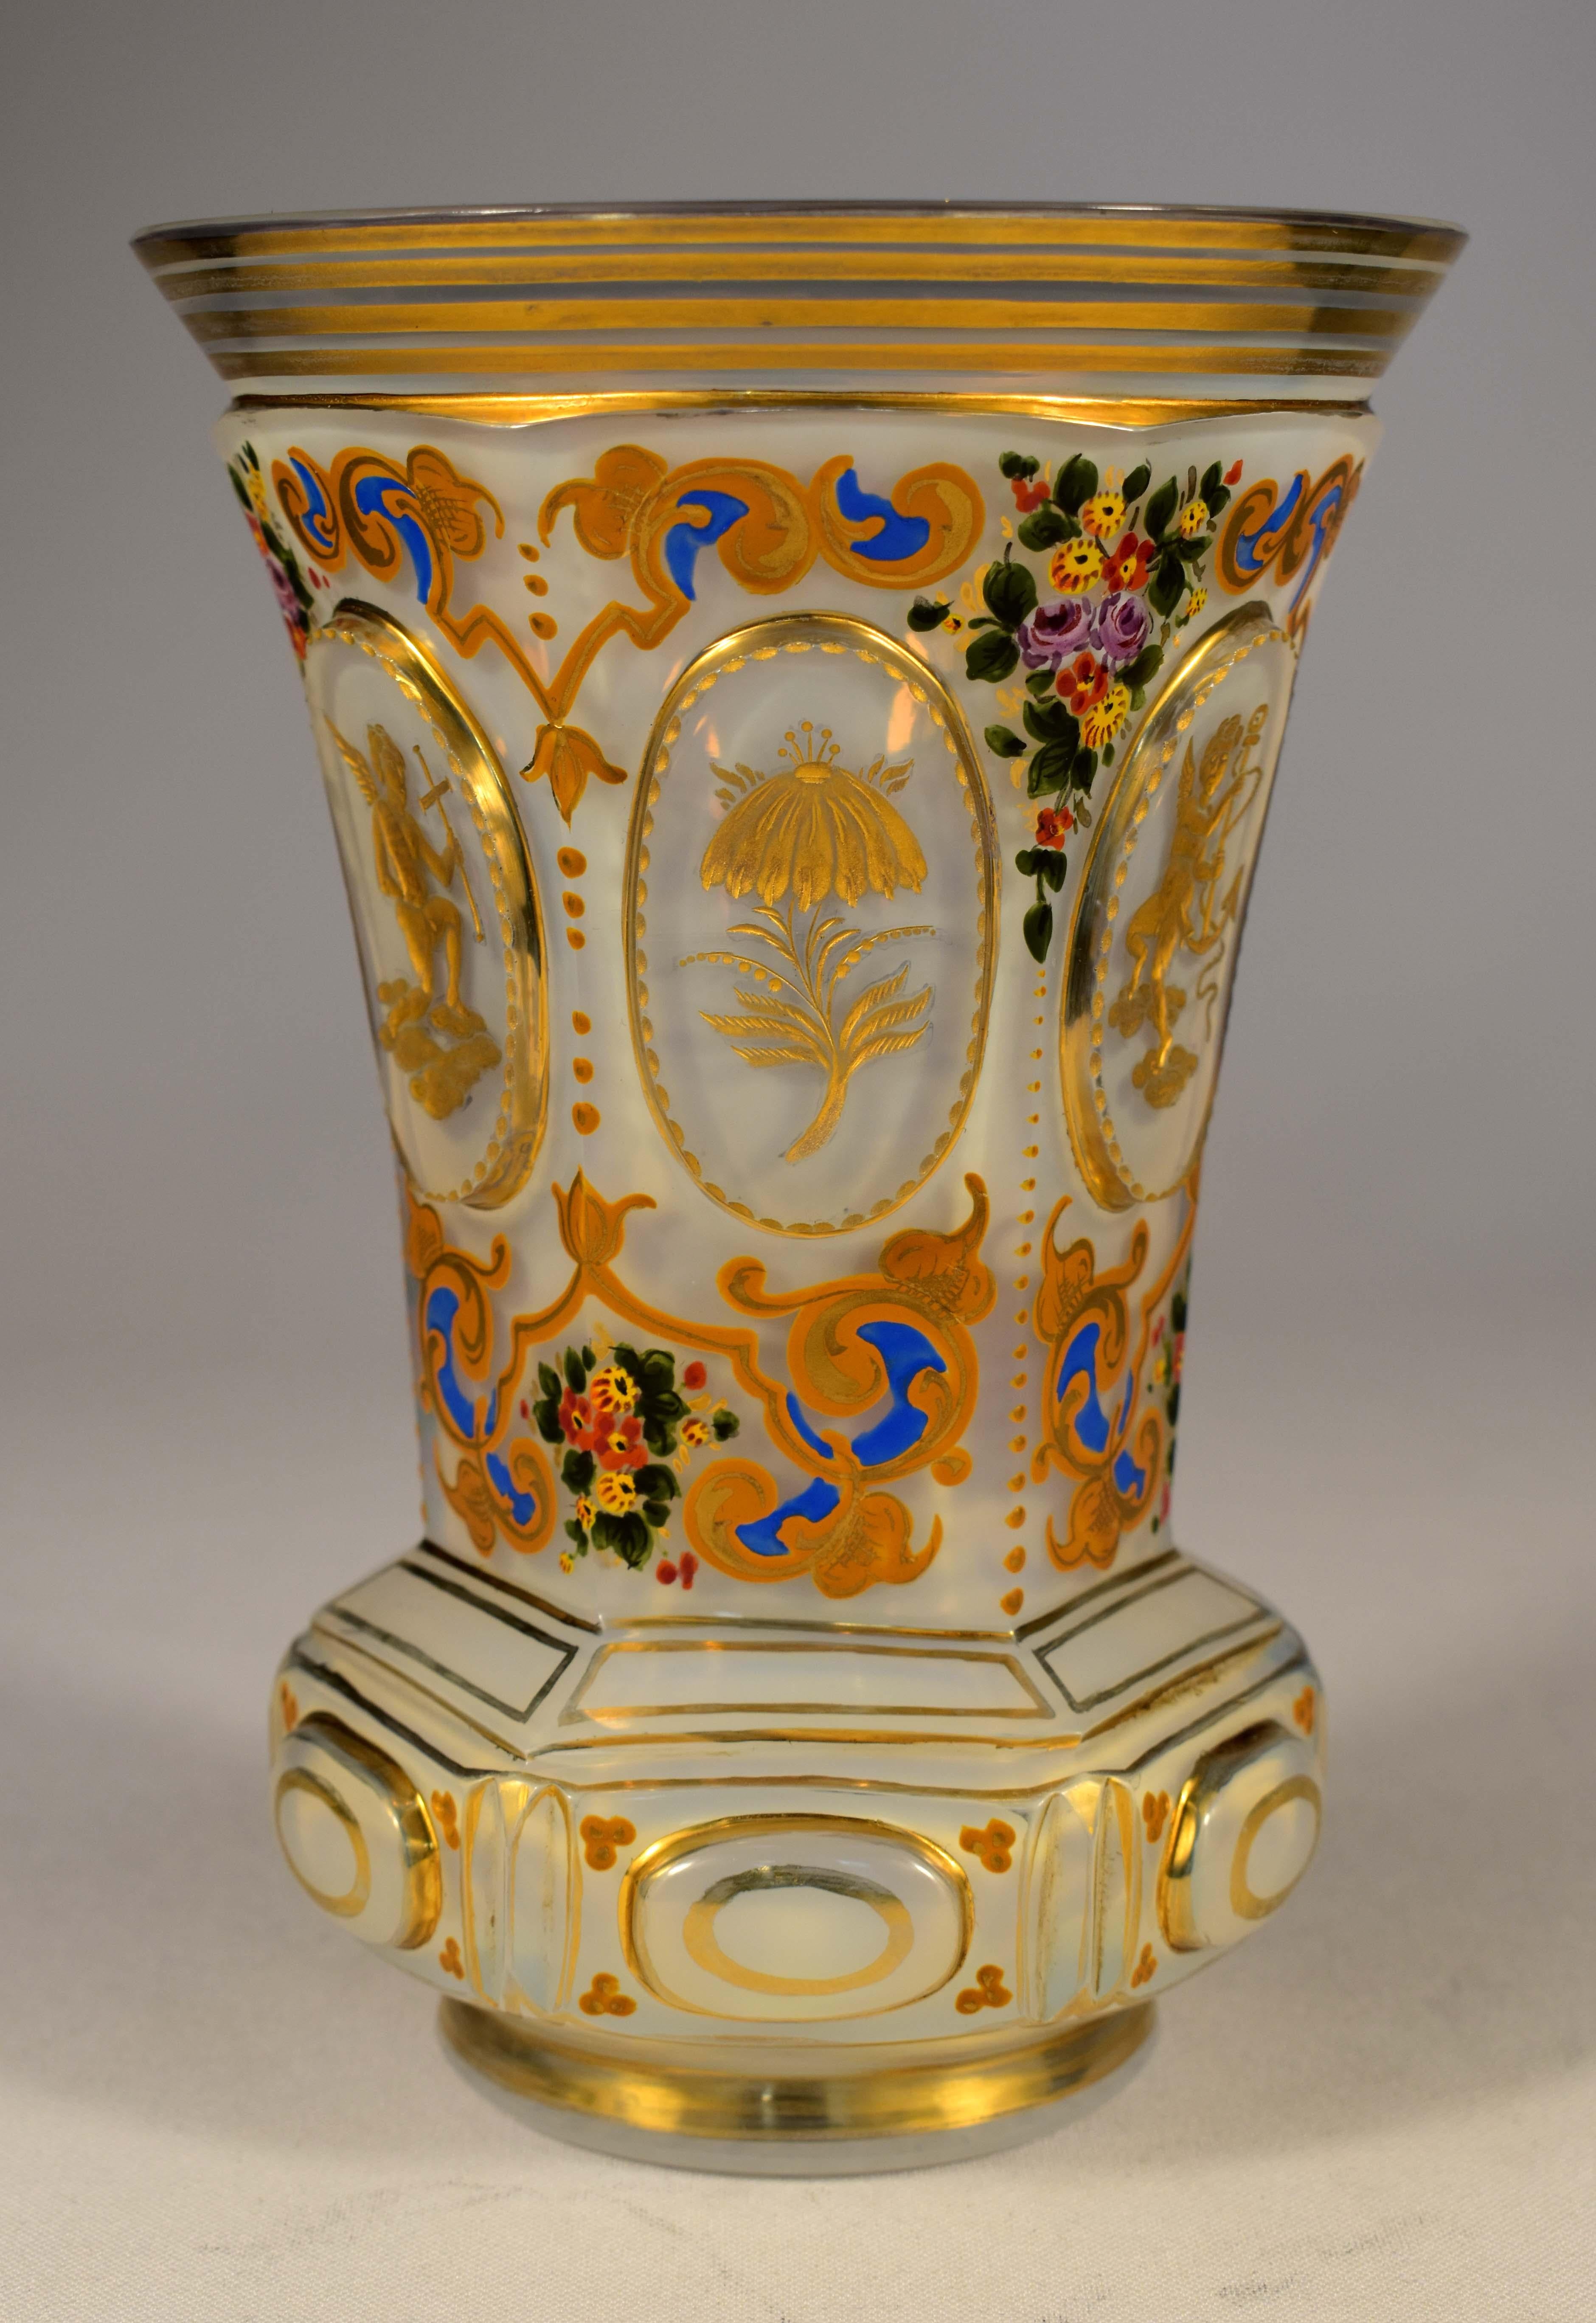 Hand-Crafted Antique Opaline Goblet with a Plate, Bohemian Glass 19th Century, Simbolisns